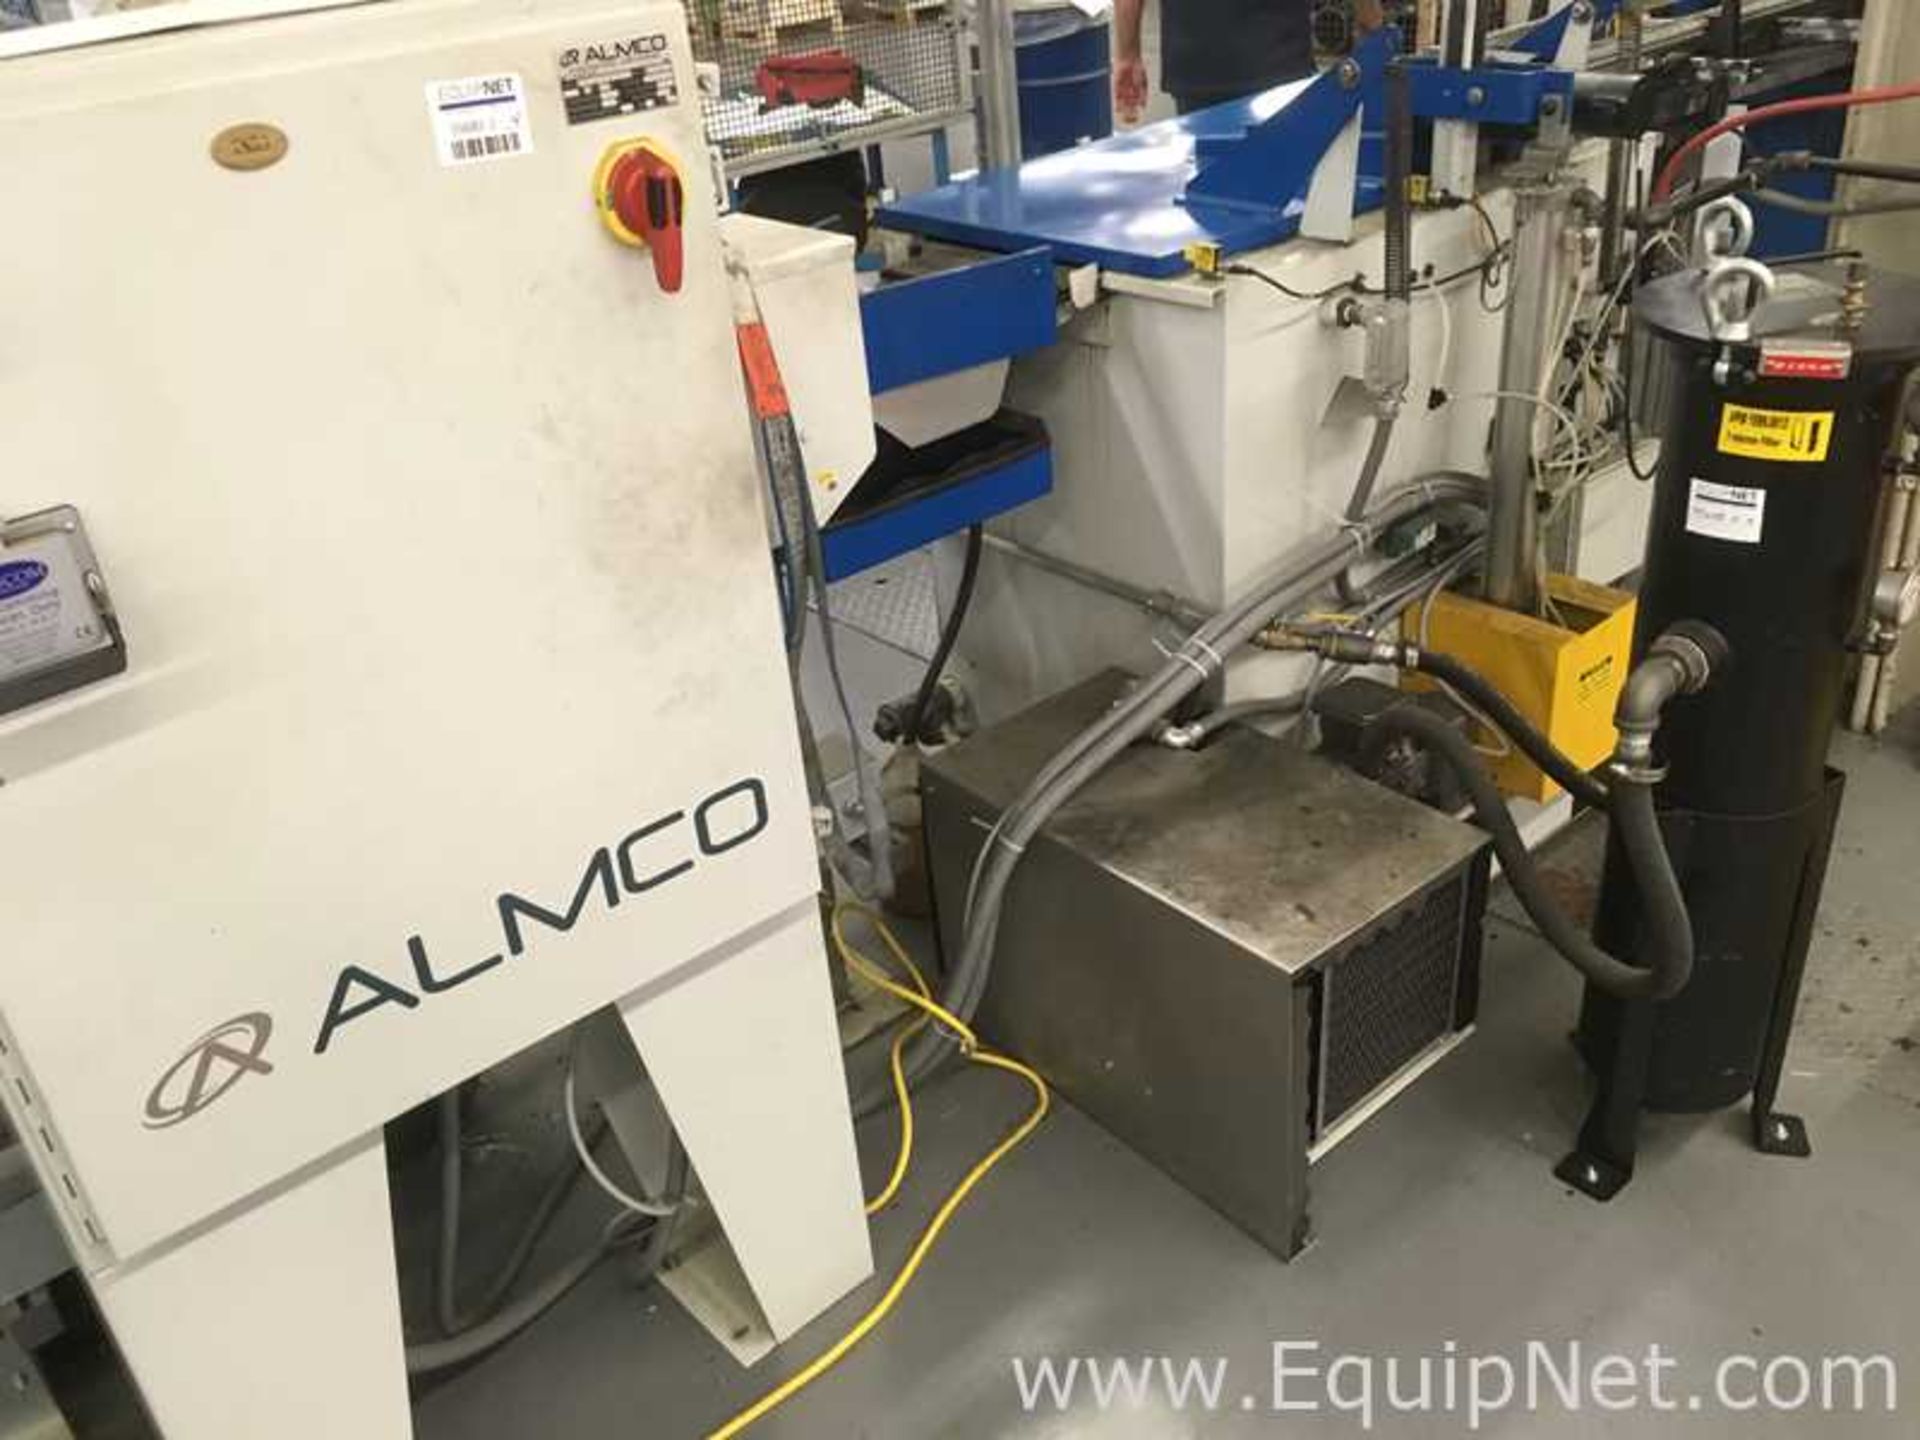 Almco PW 200 Parts Dunk Washer With Agitator Motorized Conveyor and Fire CO2 Suppression System - Image 4 of 6